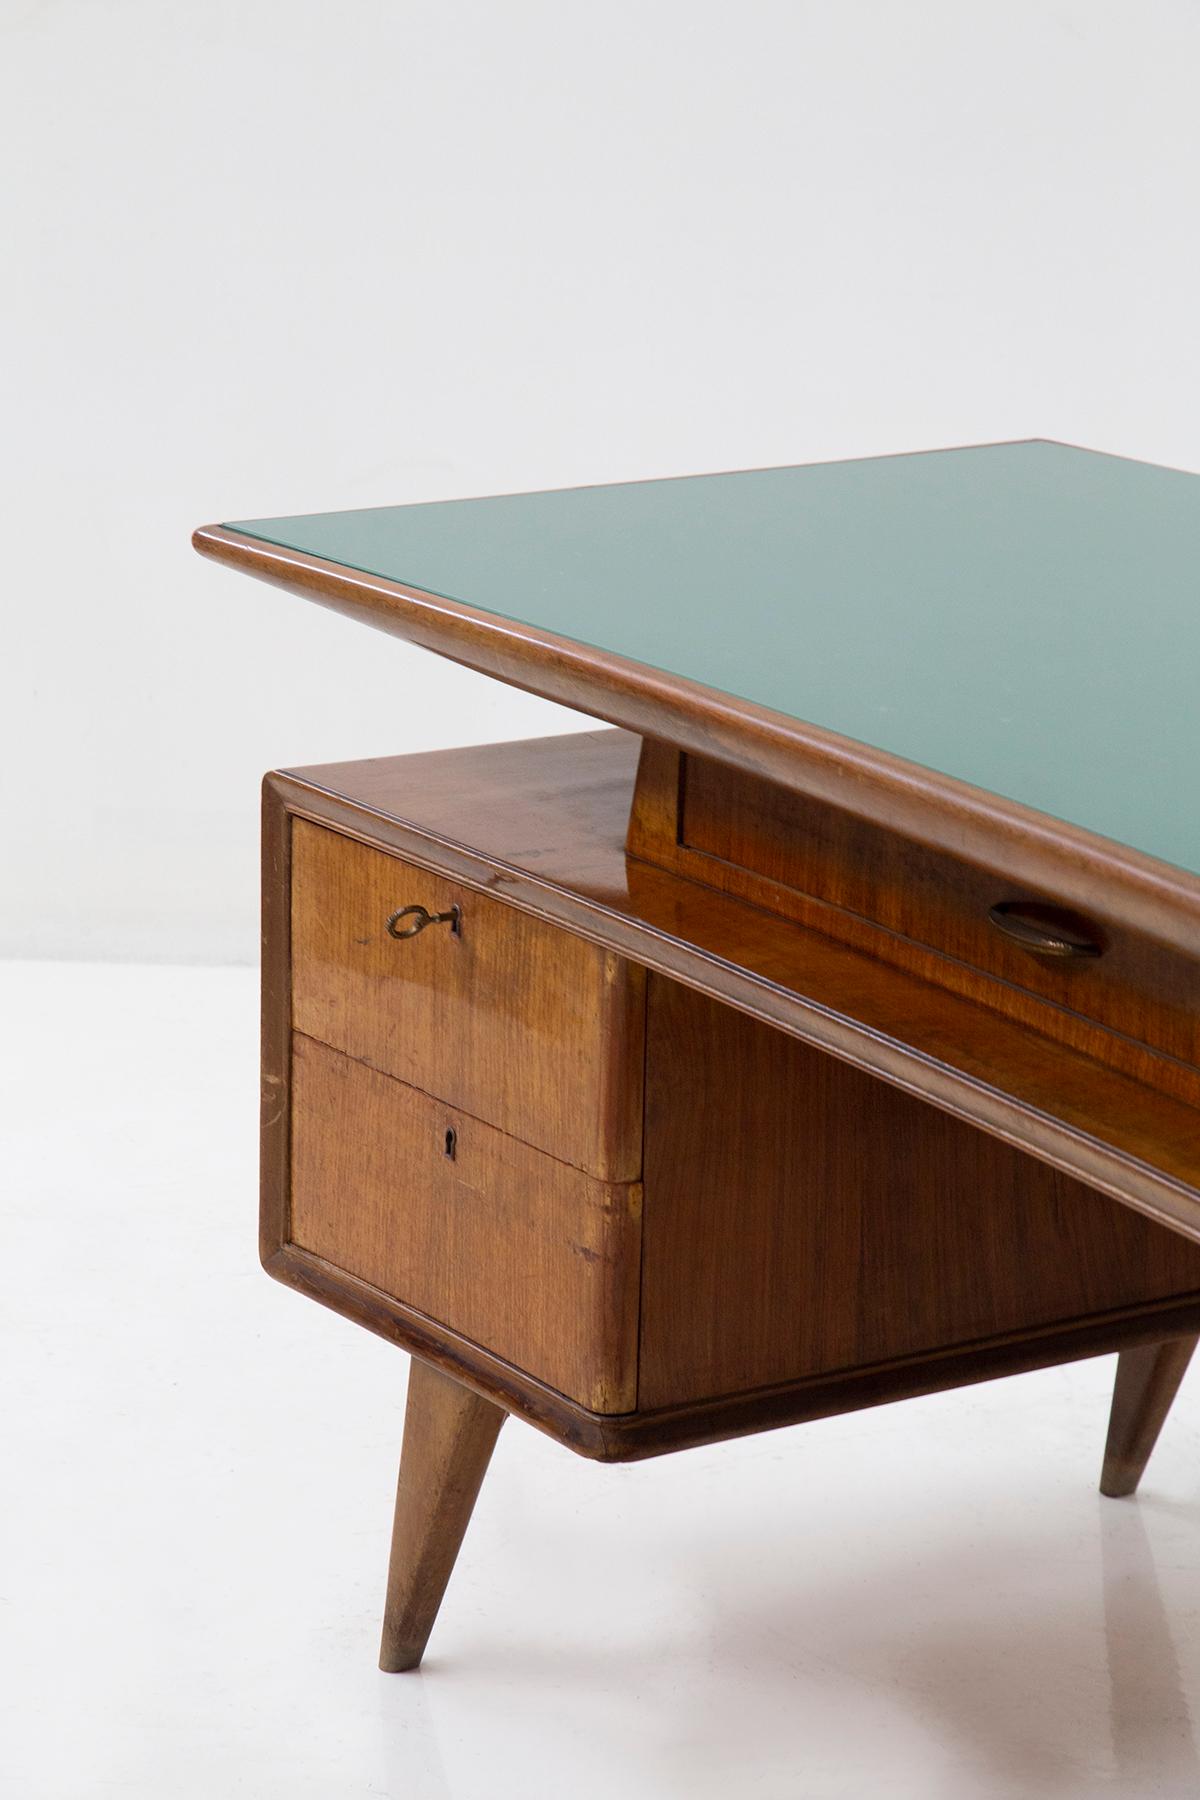 Elegant vintage Italian desk with green glass In Good Condition For Sale In Milano, IT